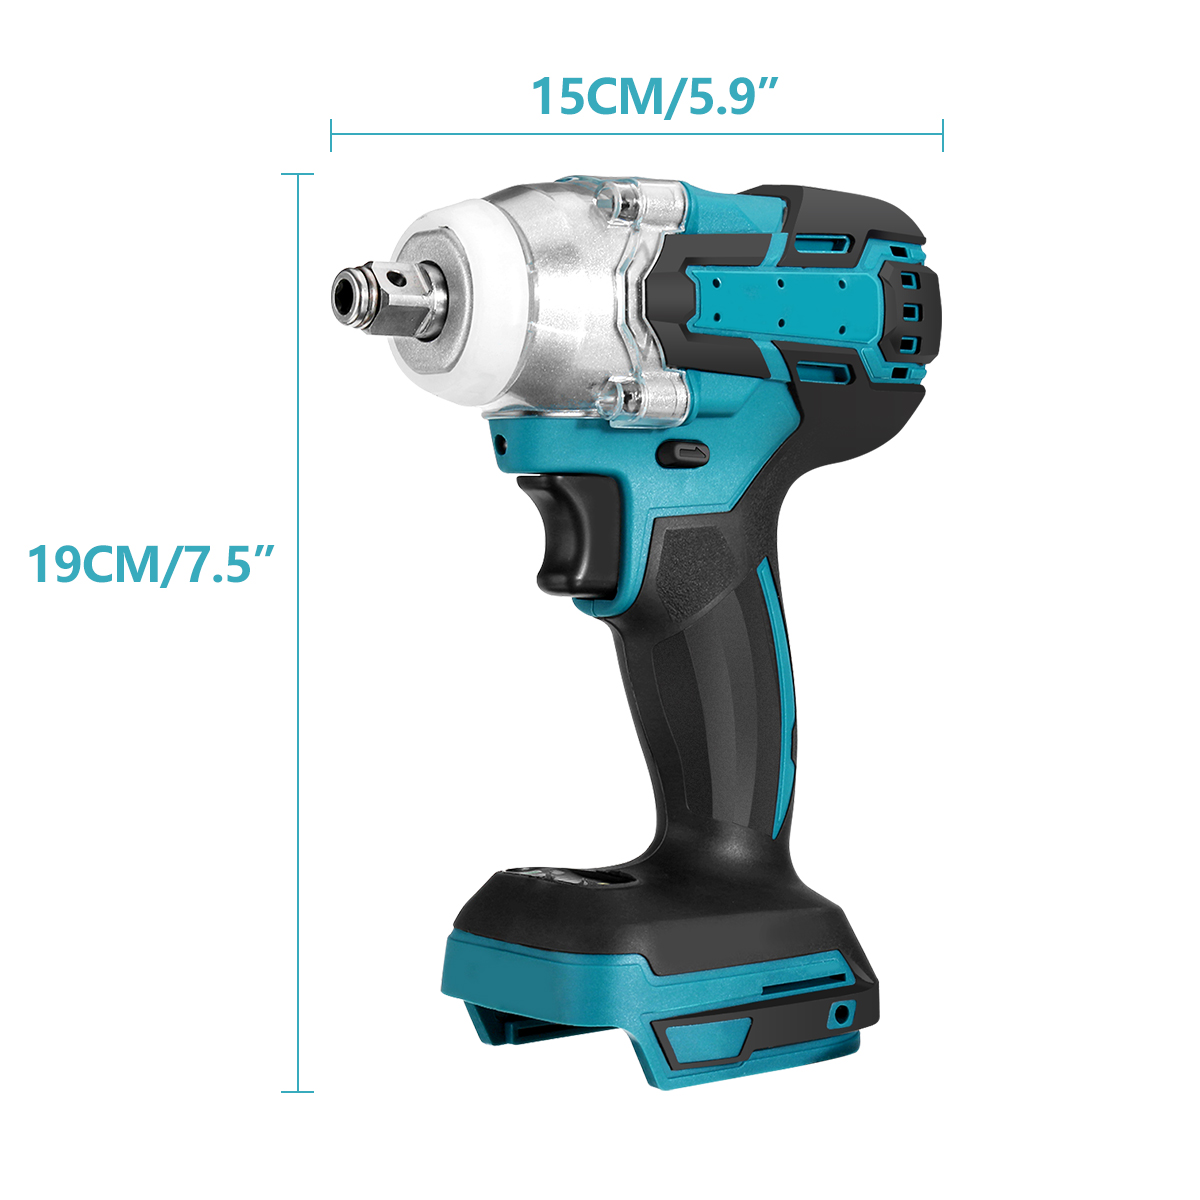 Upgrade-4-Speed-Brushless-Cordless-Electric-Impact-Wrench-Rechargeable-12-inch-Wrench-Power-Tools-fo-1853856-13